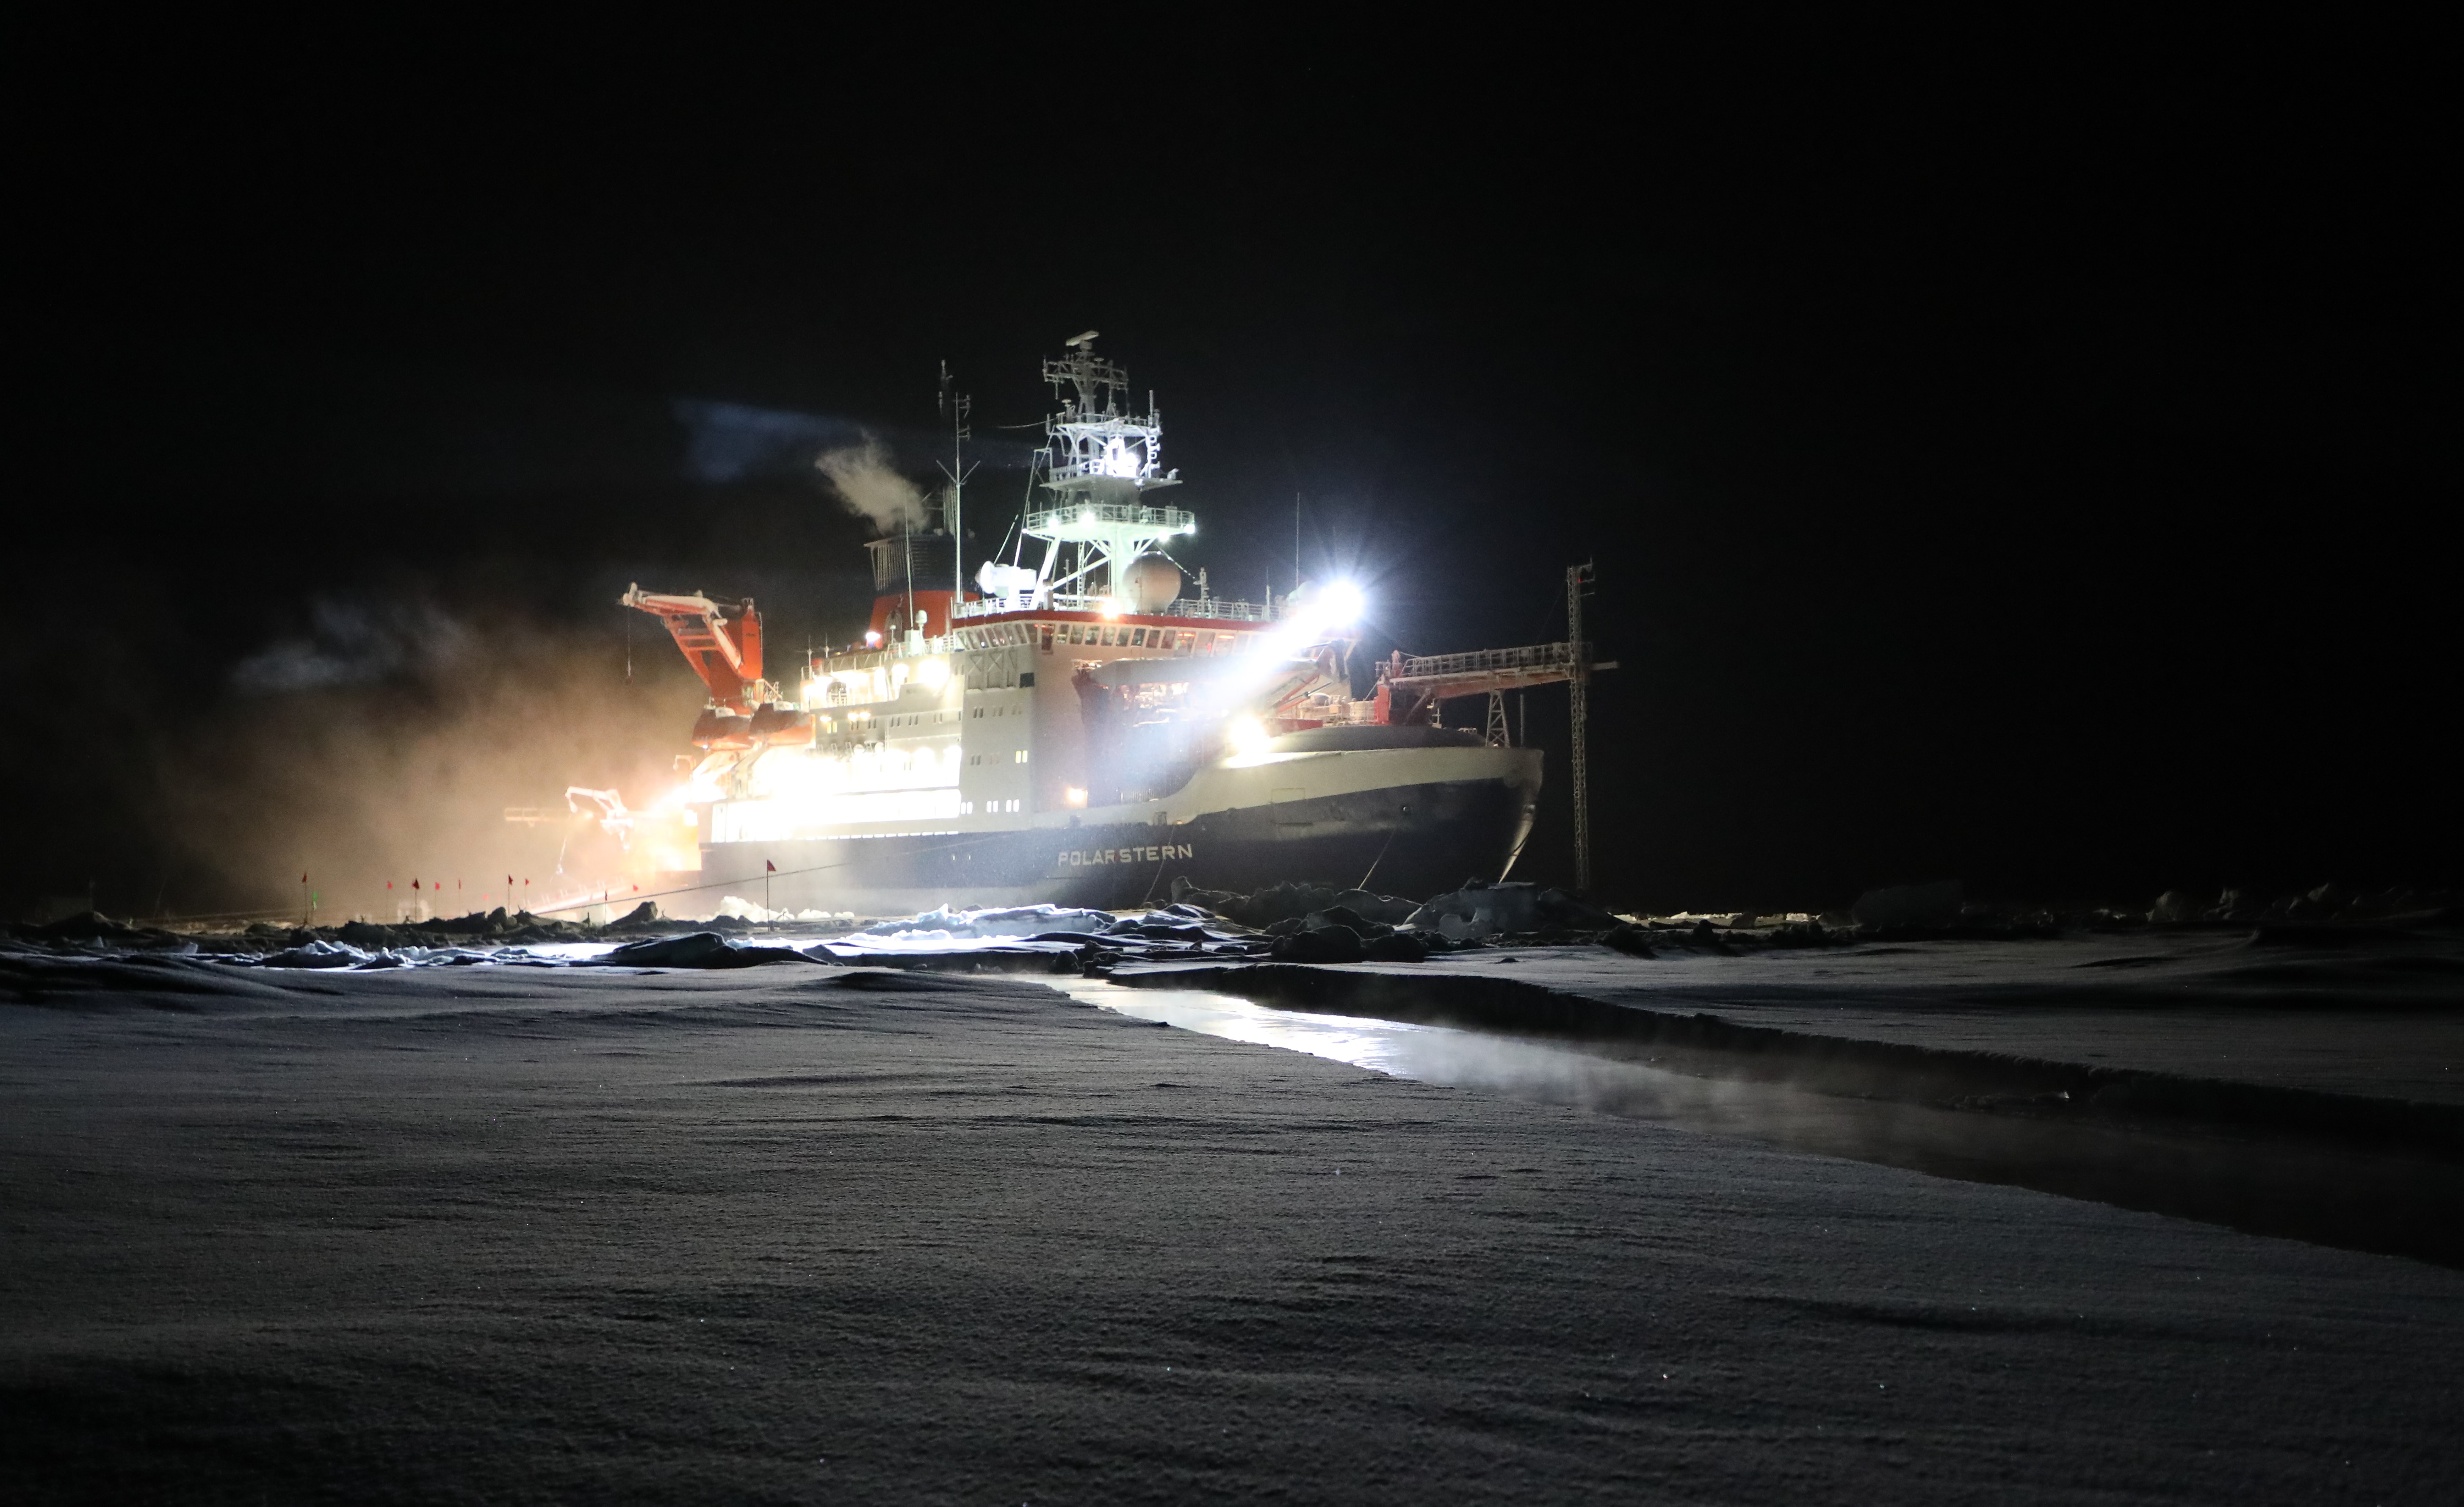 The R/V Polarstern icebreaker sits during polar night in the ice as part of the MOSAiC expedition